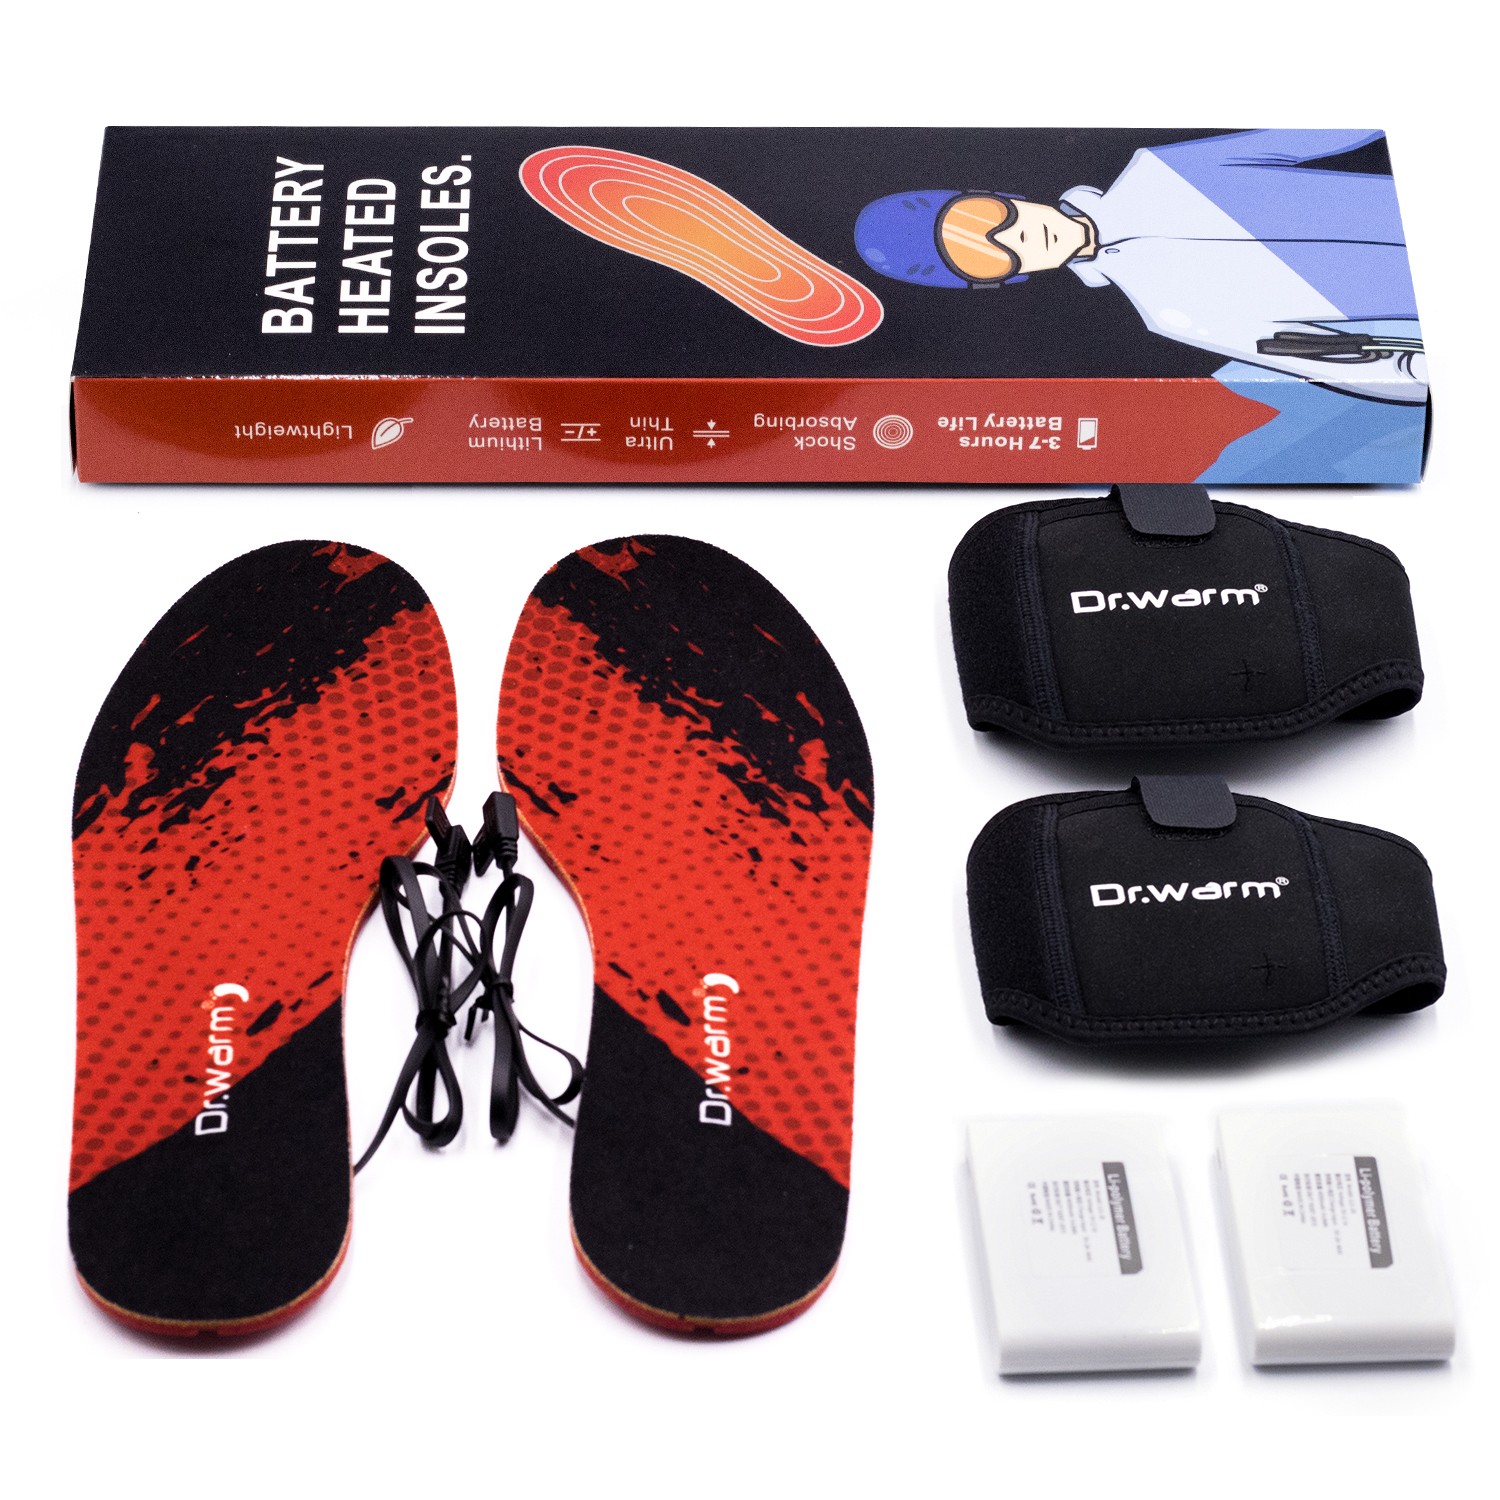 Dr. Warm dr.warm heated insoles-23